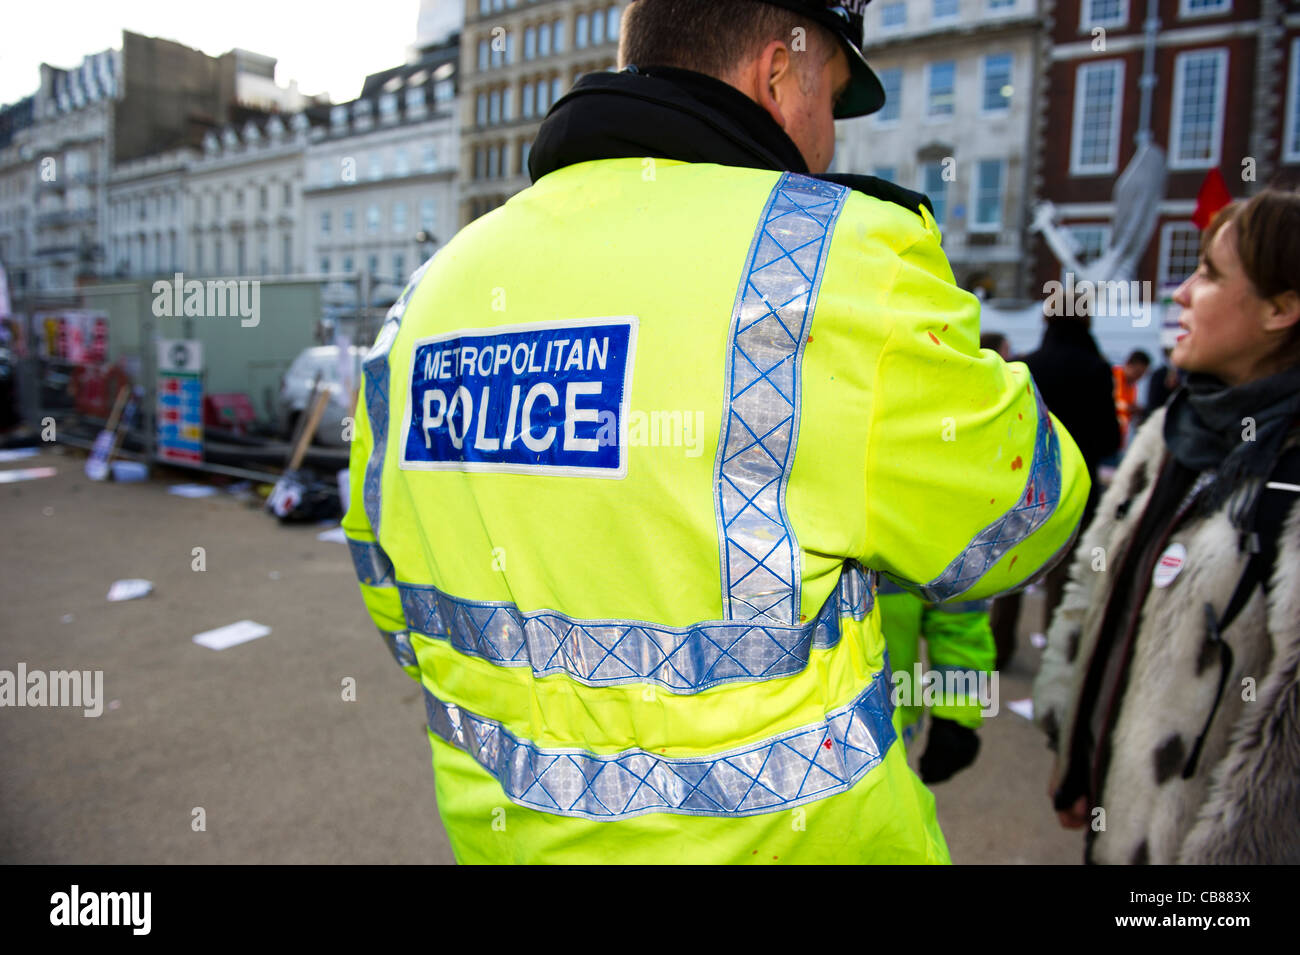 Rear view of Metropolitan police officer wearing high visibility jacket speaking to female member of the public. Stock Photo